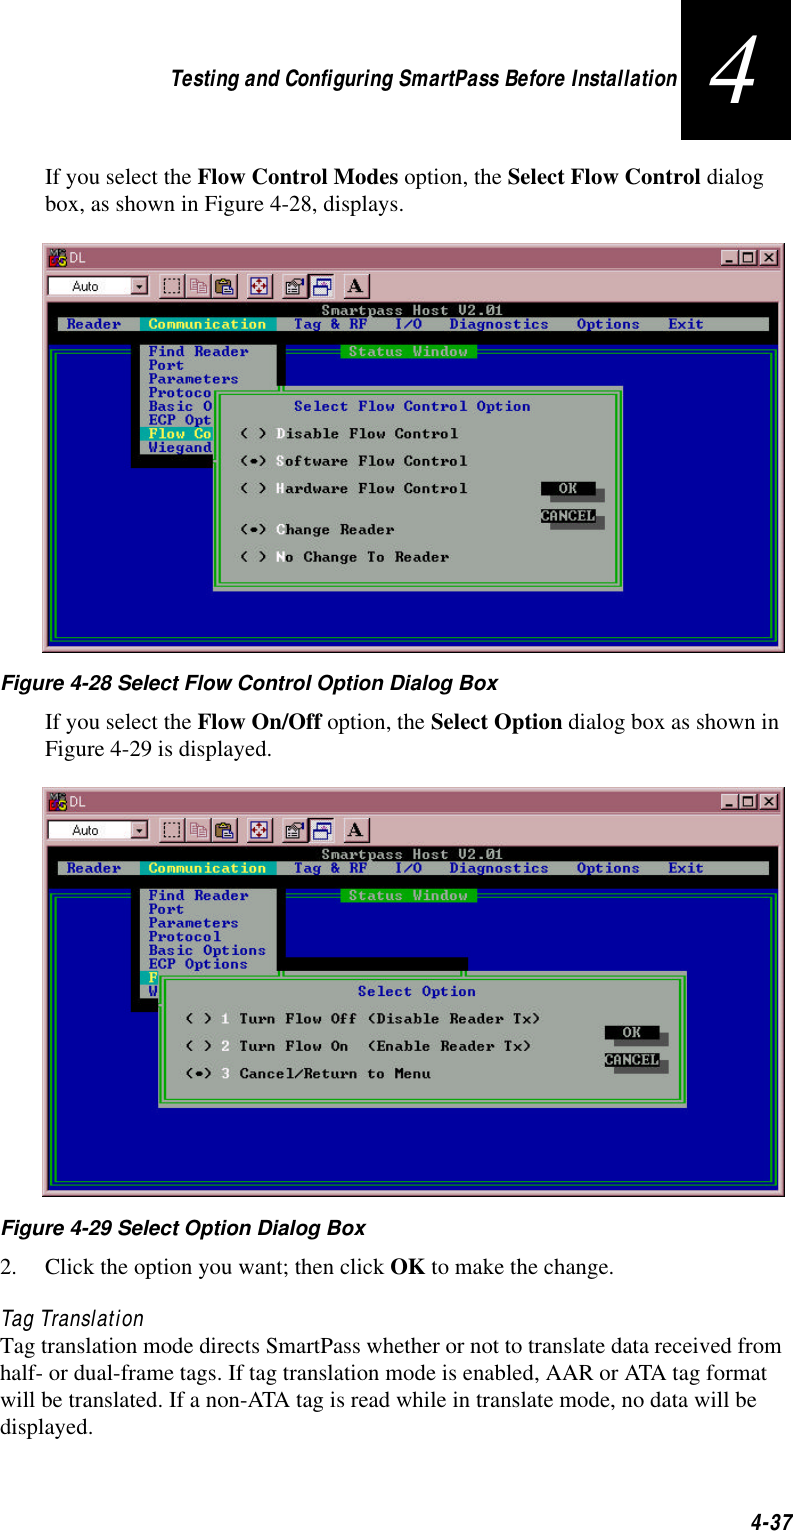 Testing and Configuring SmartPass Before Installation4-374If you select the Flow Control Modes option, the Select Flow Control dialog box, as shown in Figure 4-28, displays.Figure 4-28 Select Flow Control Option Dialog BoxIf you select the Flow On/Off option, the Select Option dialog box as shown in Figure 4-29 is displayed.Figure 4-29 Select Option Dialog Box2. Click the option you want; then click OK to make the change.Tag TranslationTag translation mode directs SmartPass whether or not to translate data received from half- or dual-frame tags. If tag translation mode is enabled, AAR or ATA tag format will be translated. If a non-ATA tag is read while in translate mode, no data will be displayed.